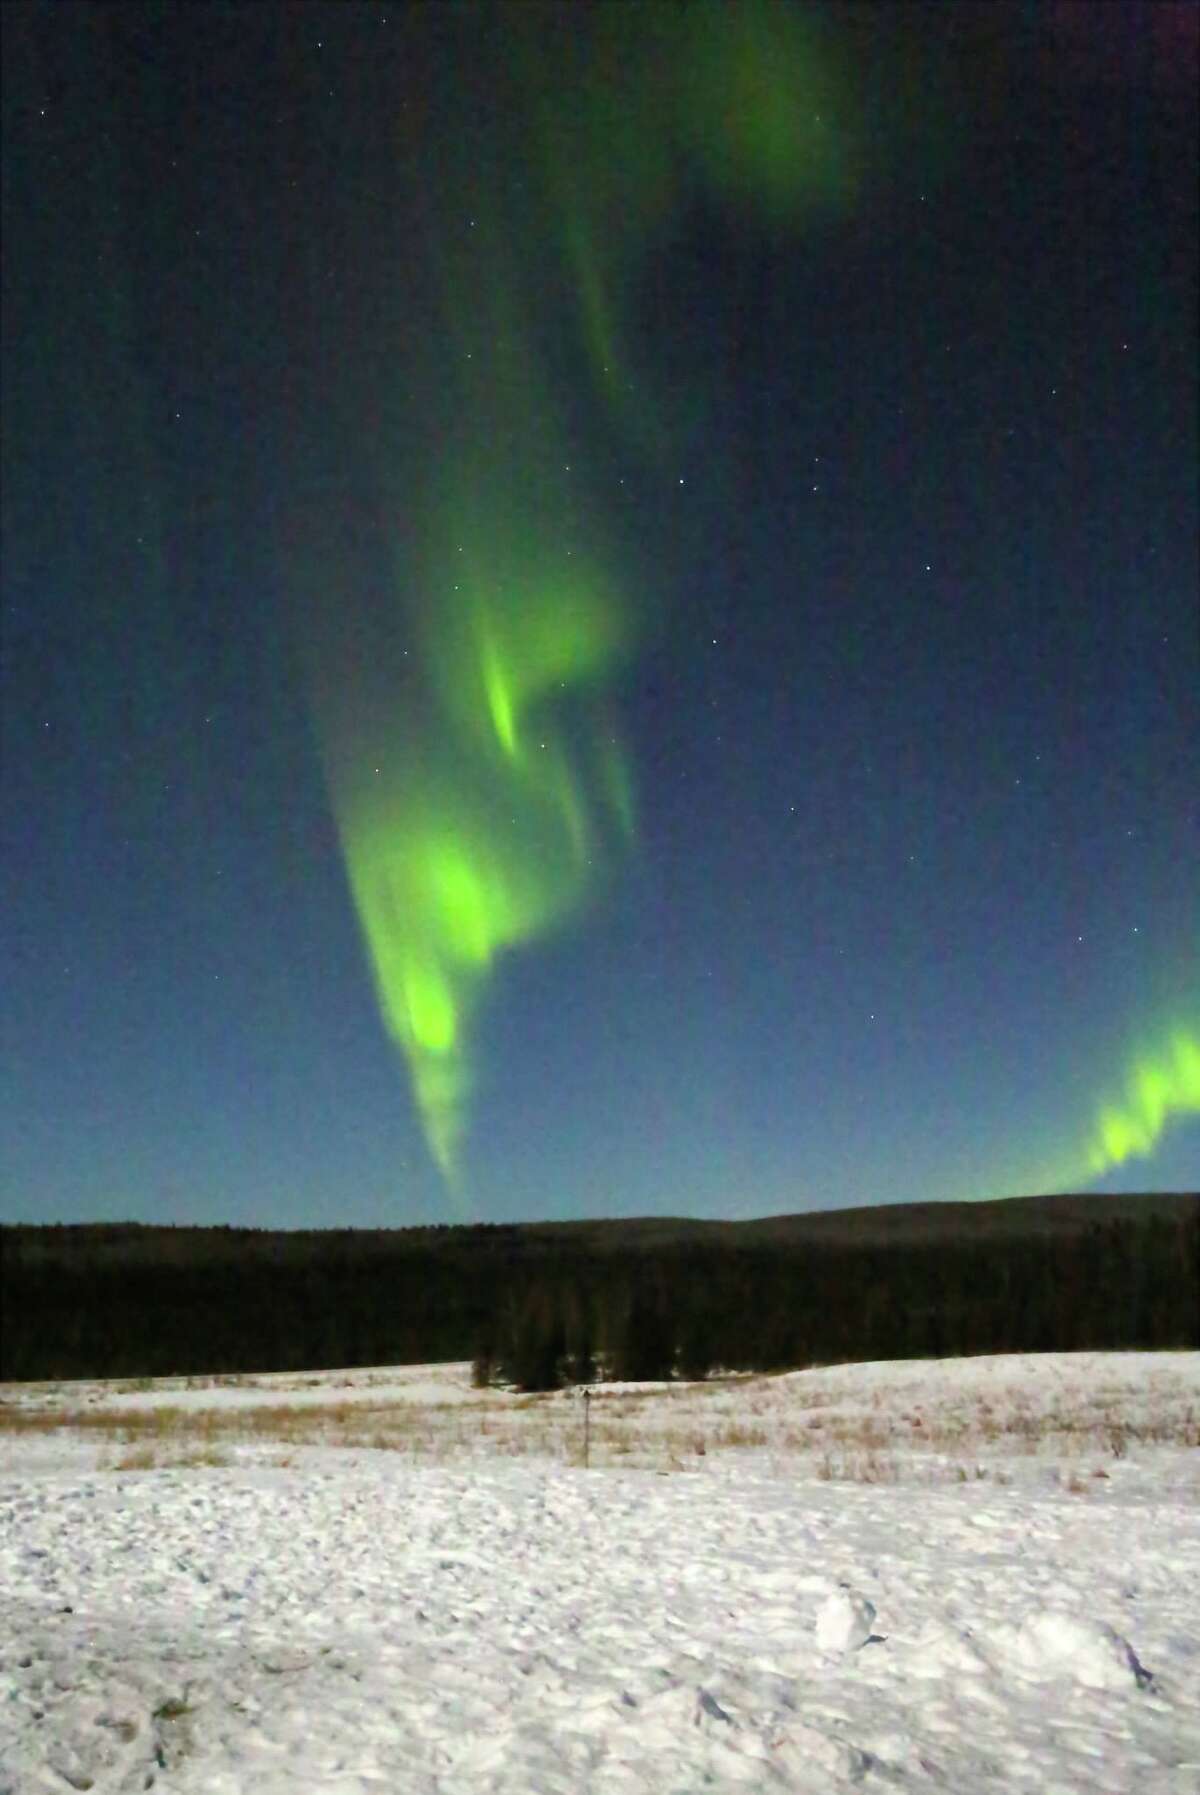 The aurora borealis, or northern lights, appear after midnight in Pleasant Valley, Alaska, not far from the Arctic Circle.